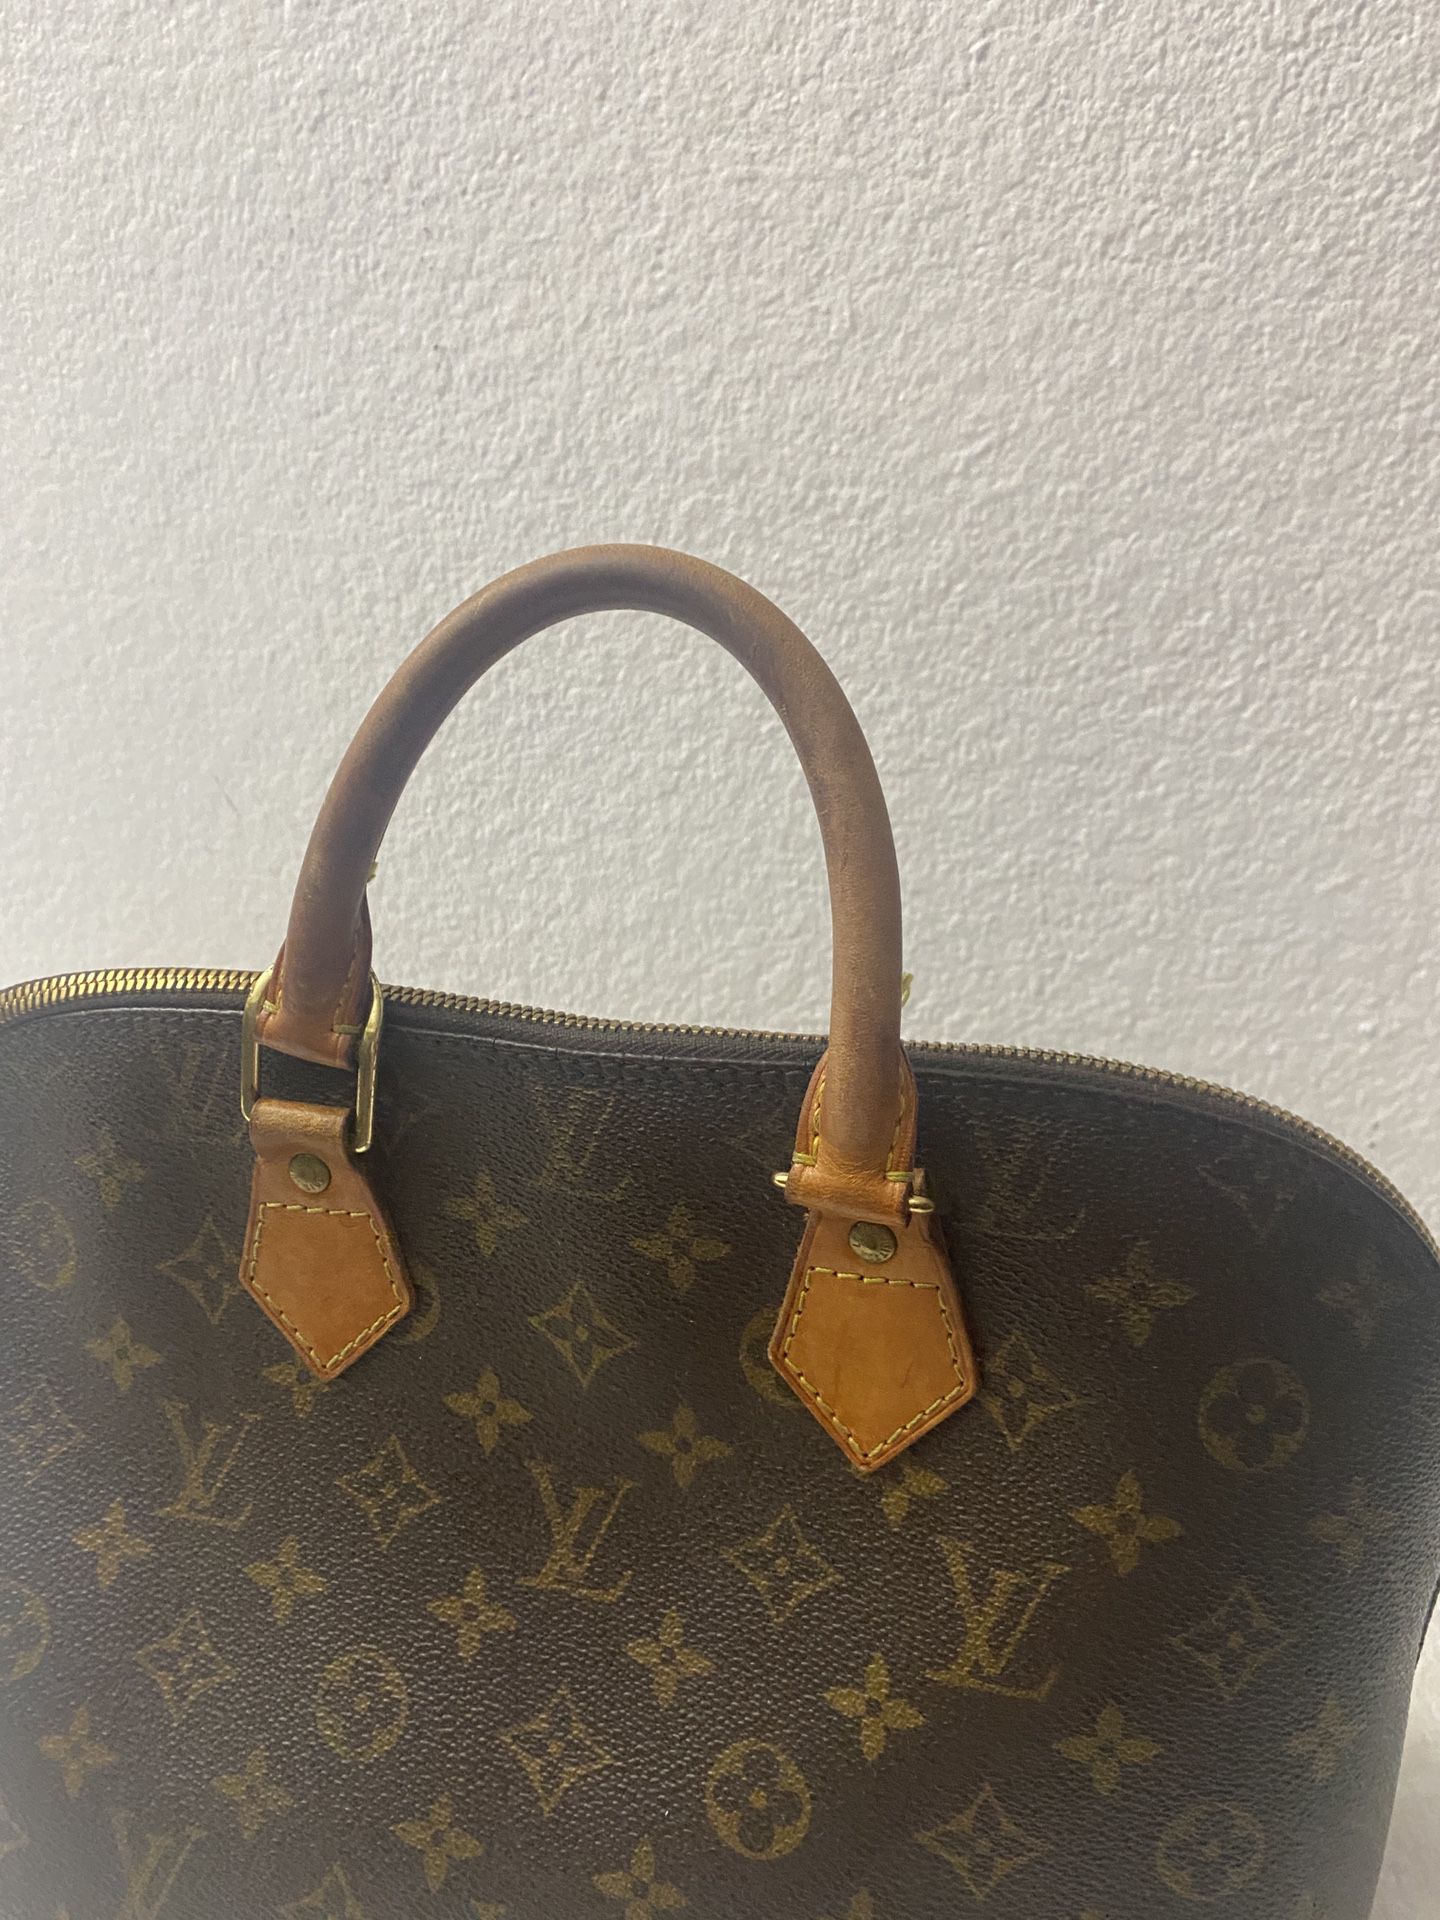 Louis Vuitton Alma BB Bags for Sale in Hawthorne, CA - OfferUp